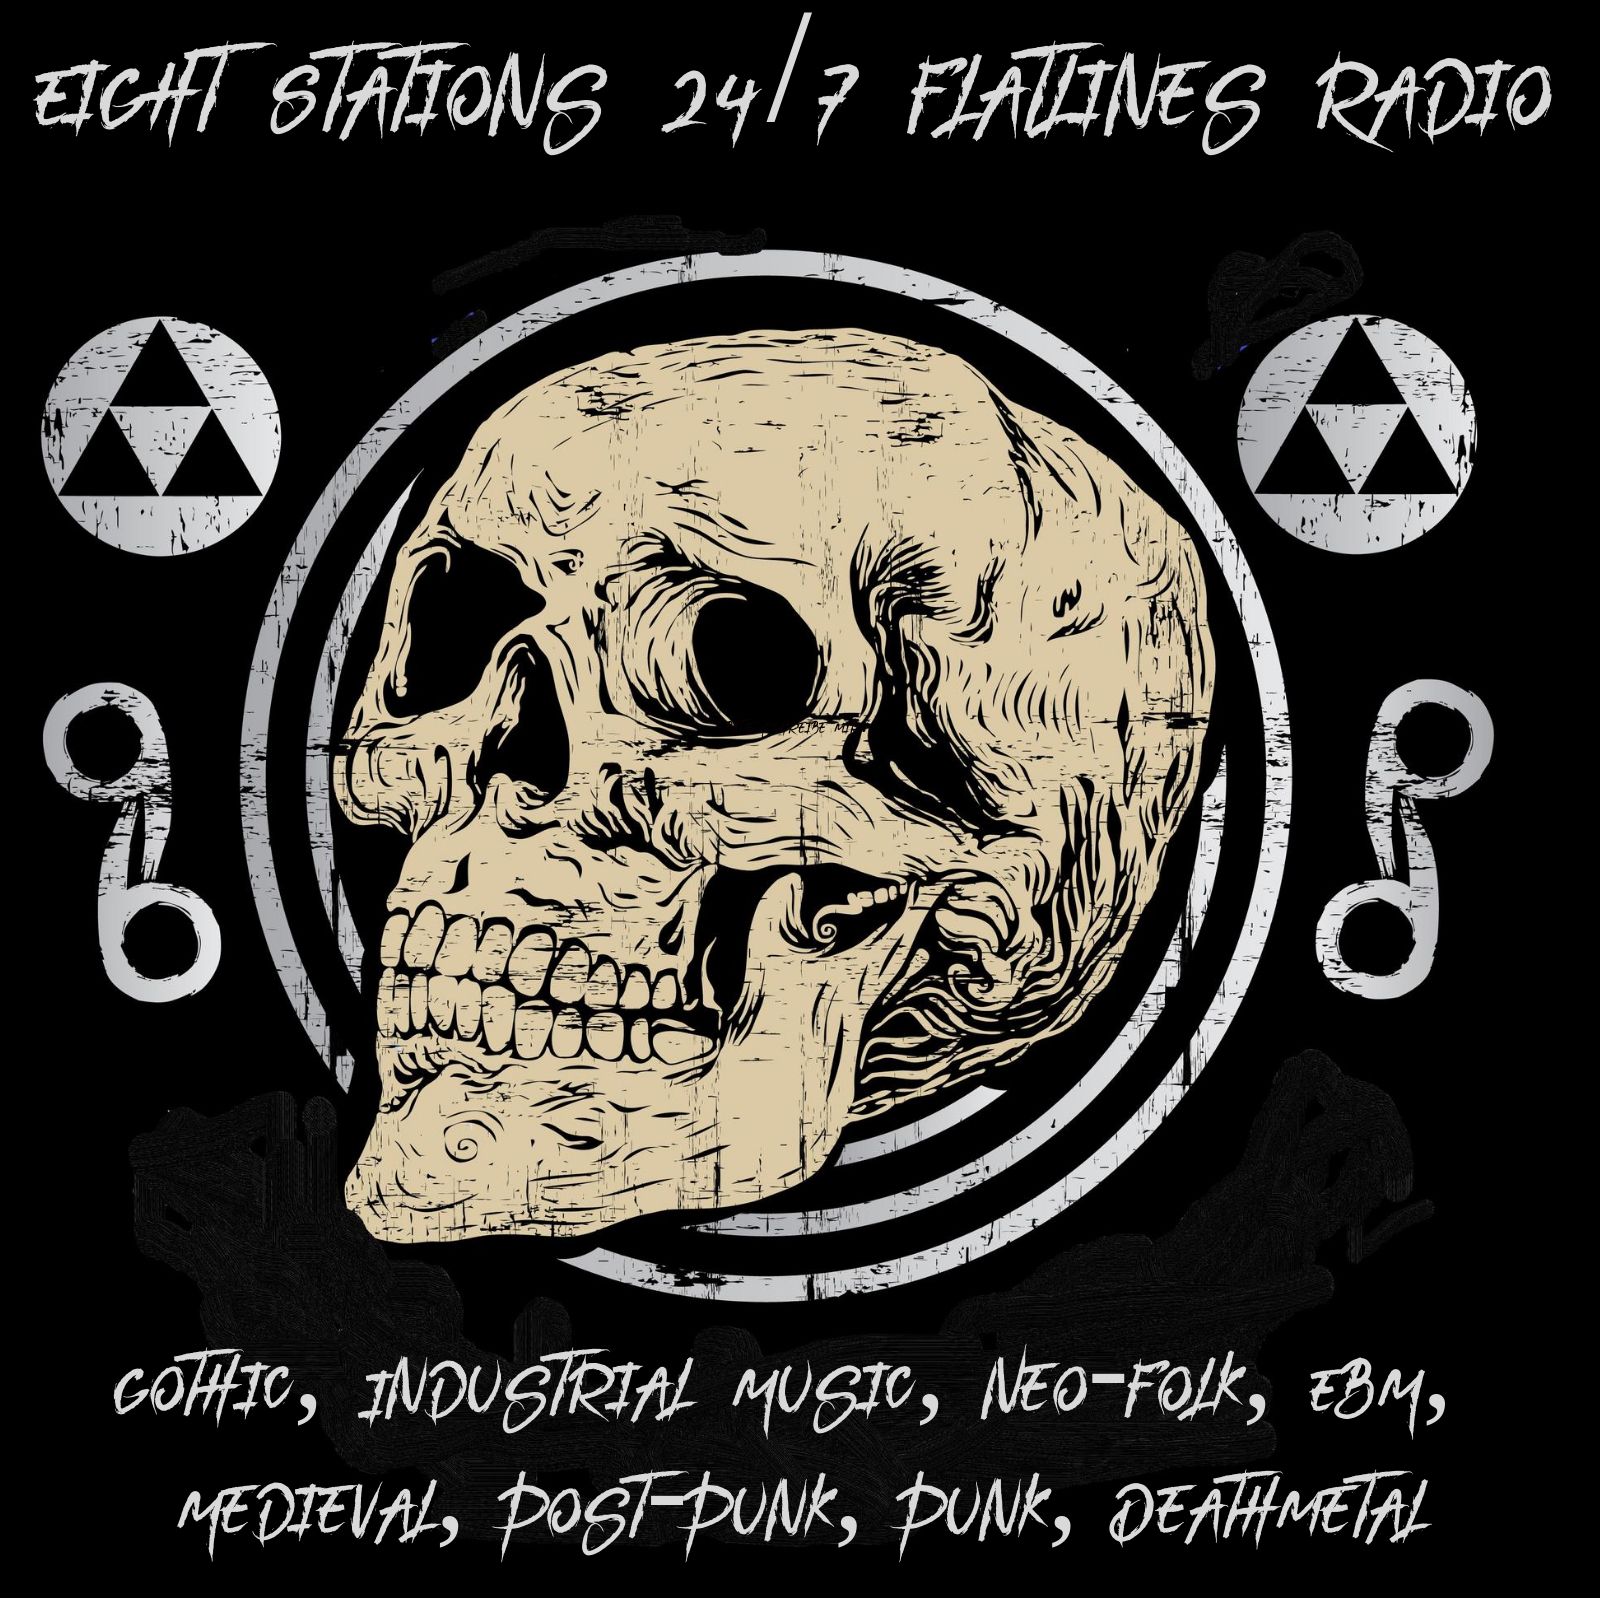 Gothic, Industrial Music, Neo-Folk, EBM, Medieval, Post-Punk, Punk, Bands, Deathmetal from FlatlinesRadio Listen to your favorite bands from your favorite genres on FlatlinesRadio.